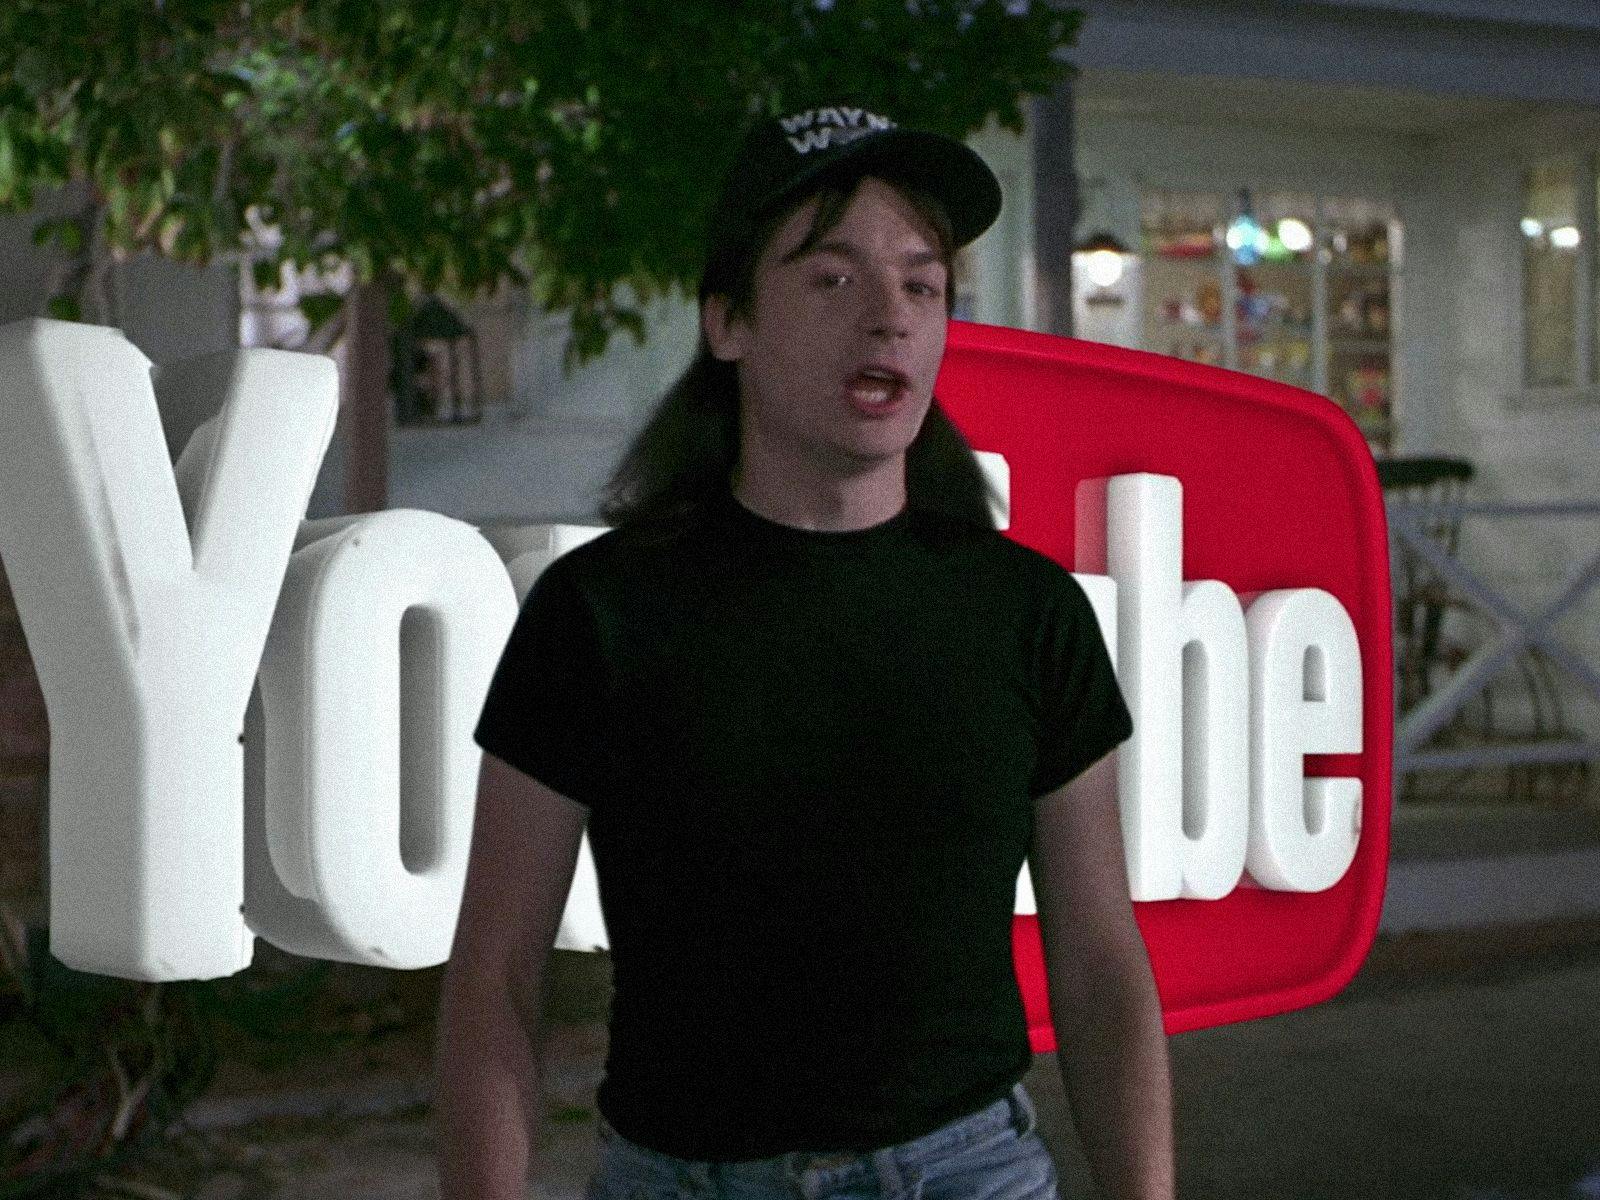 A digitally edited still from the movie Wayne's World, with Wayne walking in front of a large 3D YouTube logo.